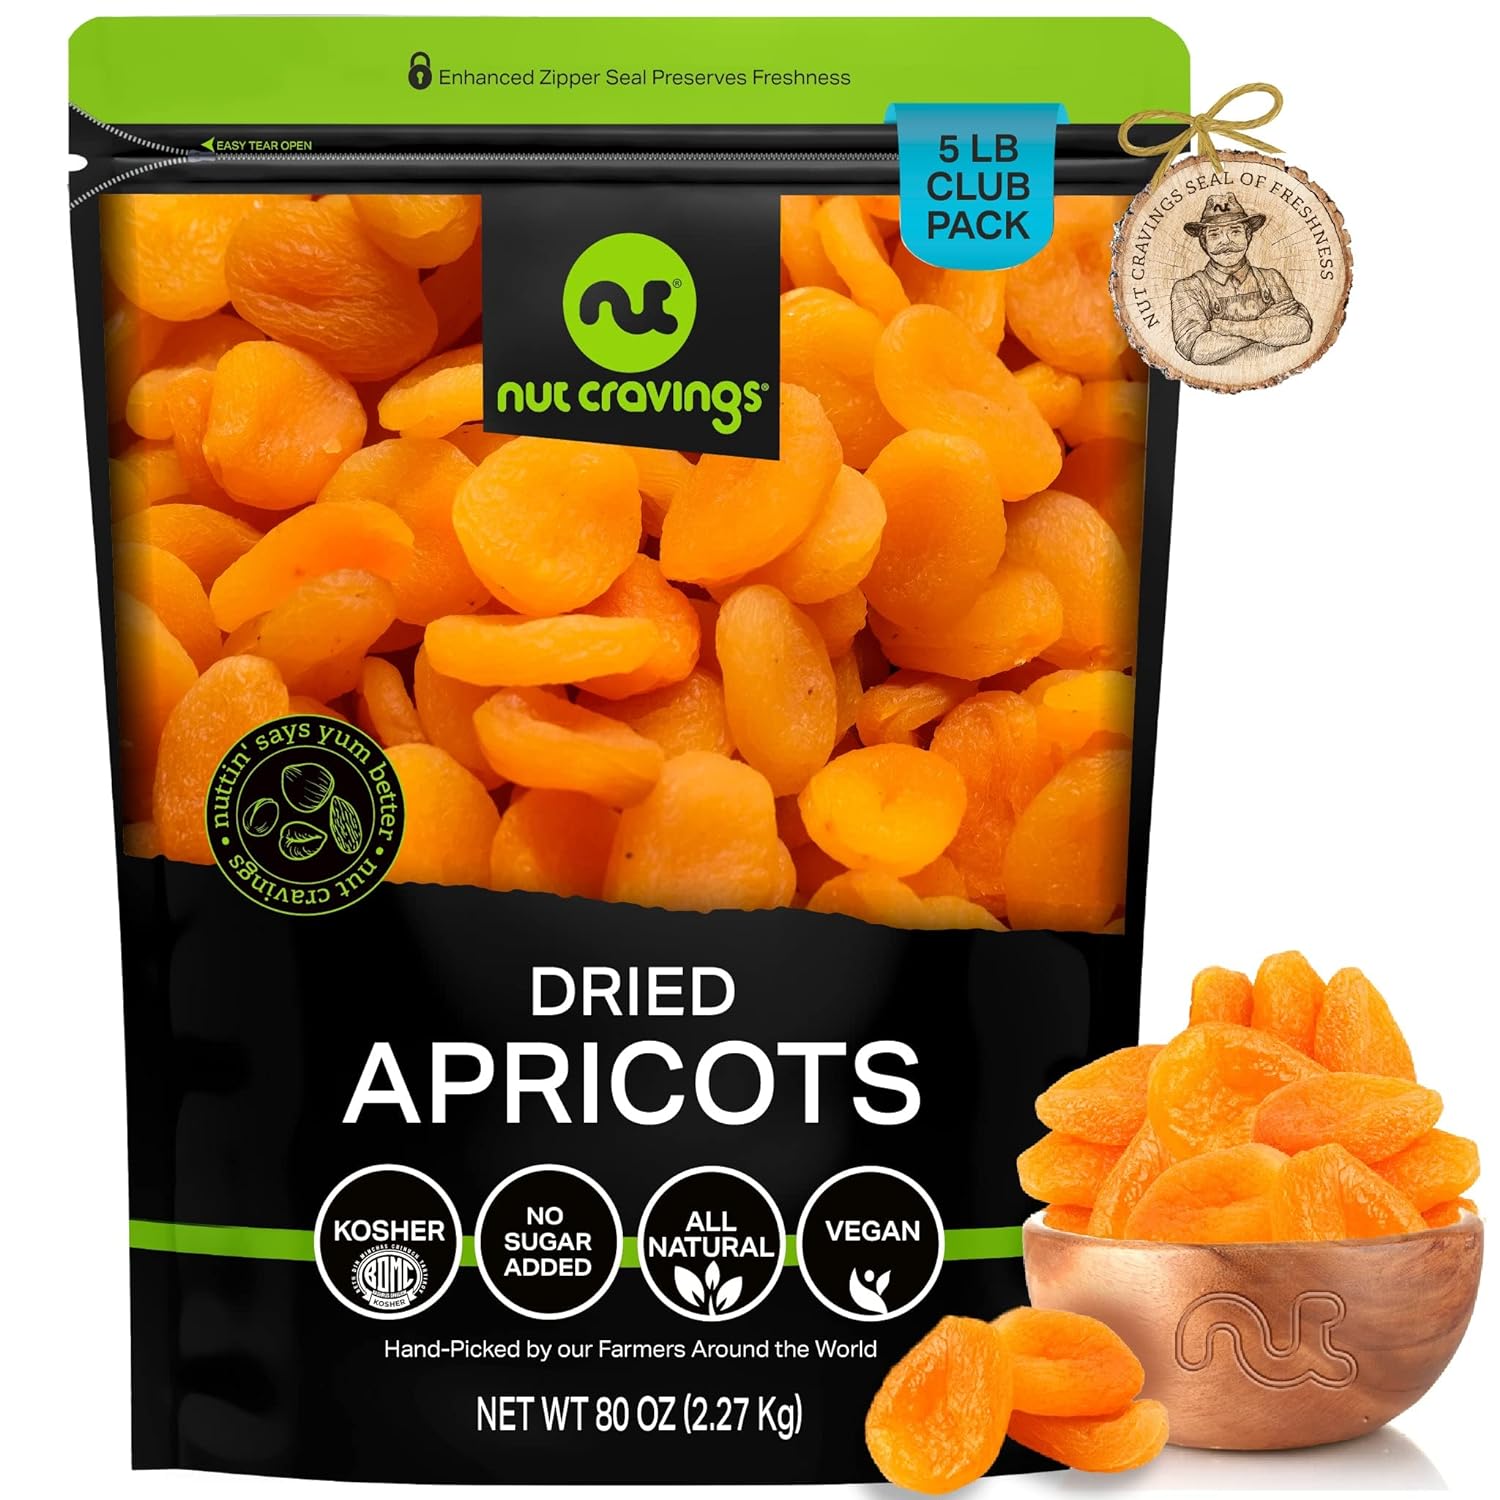 Nut Cravings Dry Fruits - Sun Dried Turkish Apricots, No Sugar Added (80oz - 5 LB, Bulk) Packed Fresh in Resealable Bag - Sweet Snack, Healthy Food, All Natural, Vegan, Kosher Certified